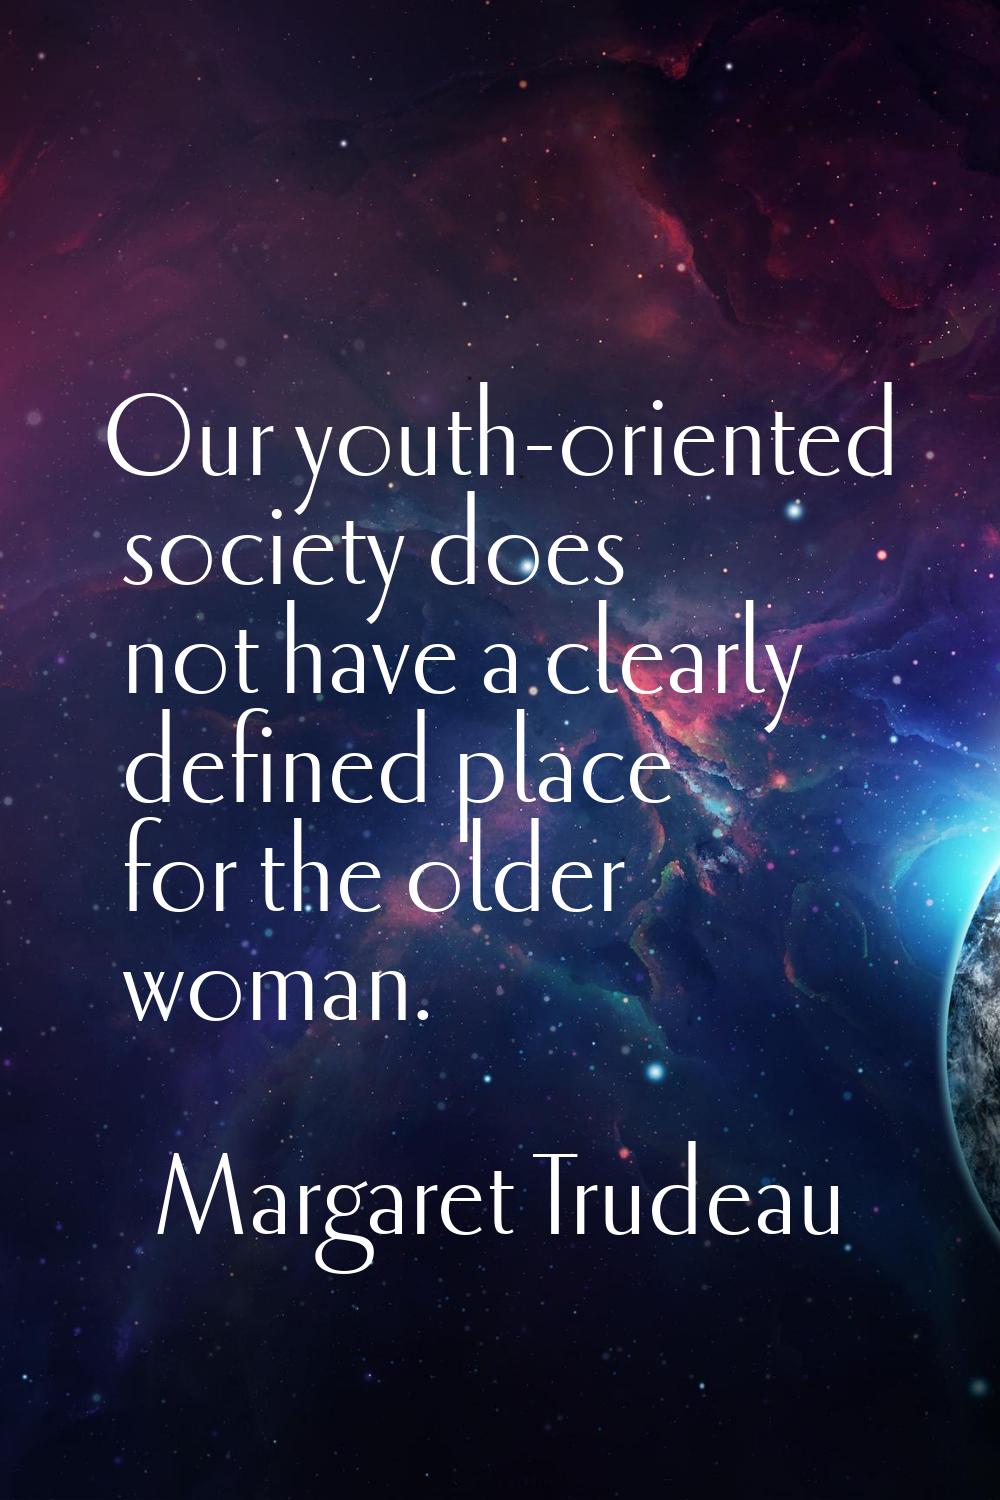 Our youth-oriented society does not have a clearly defined place for the older woman.